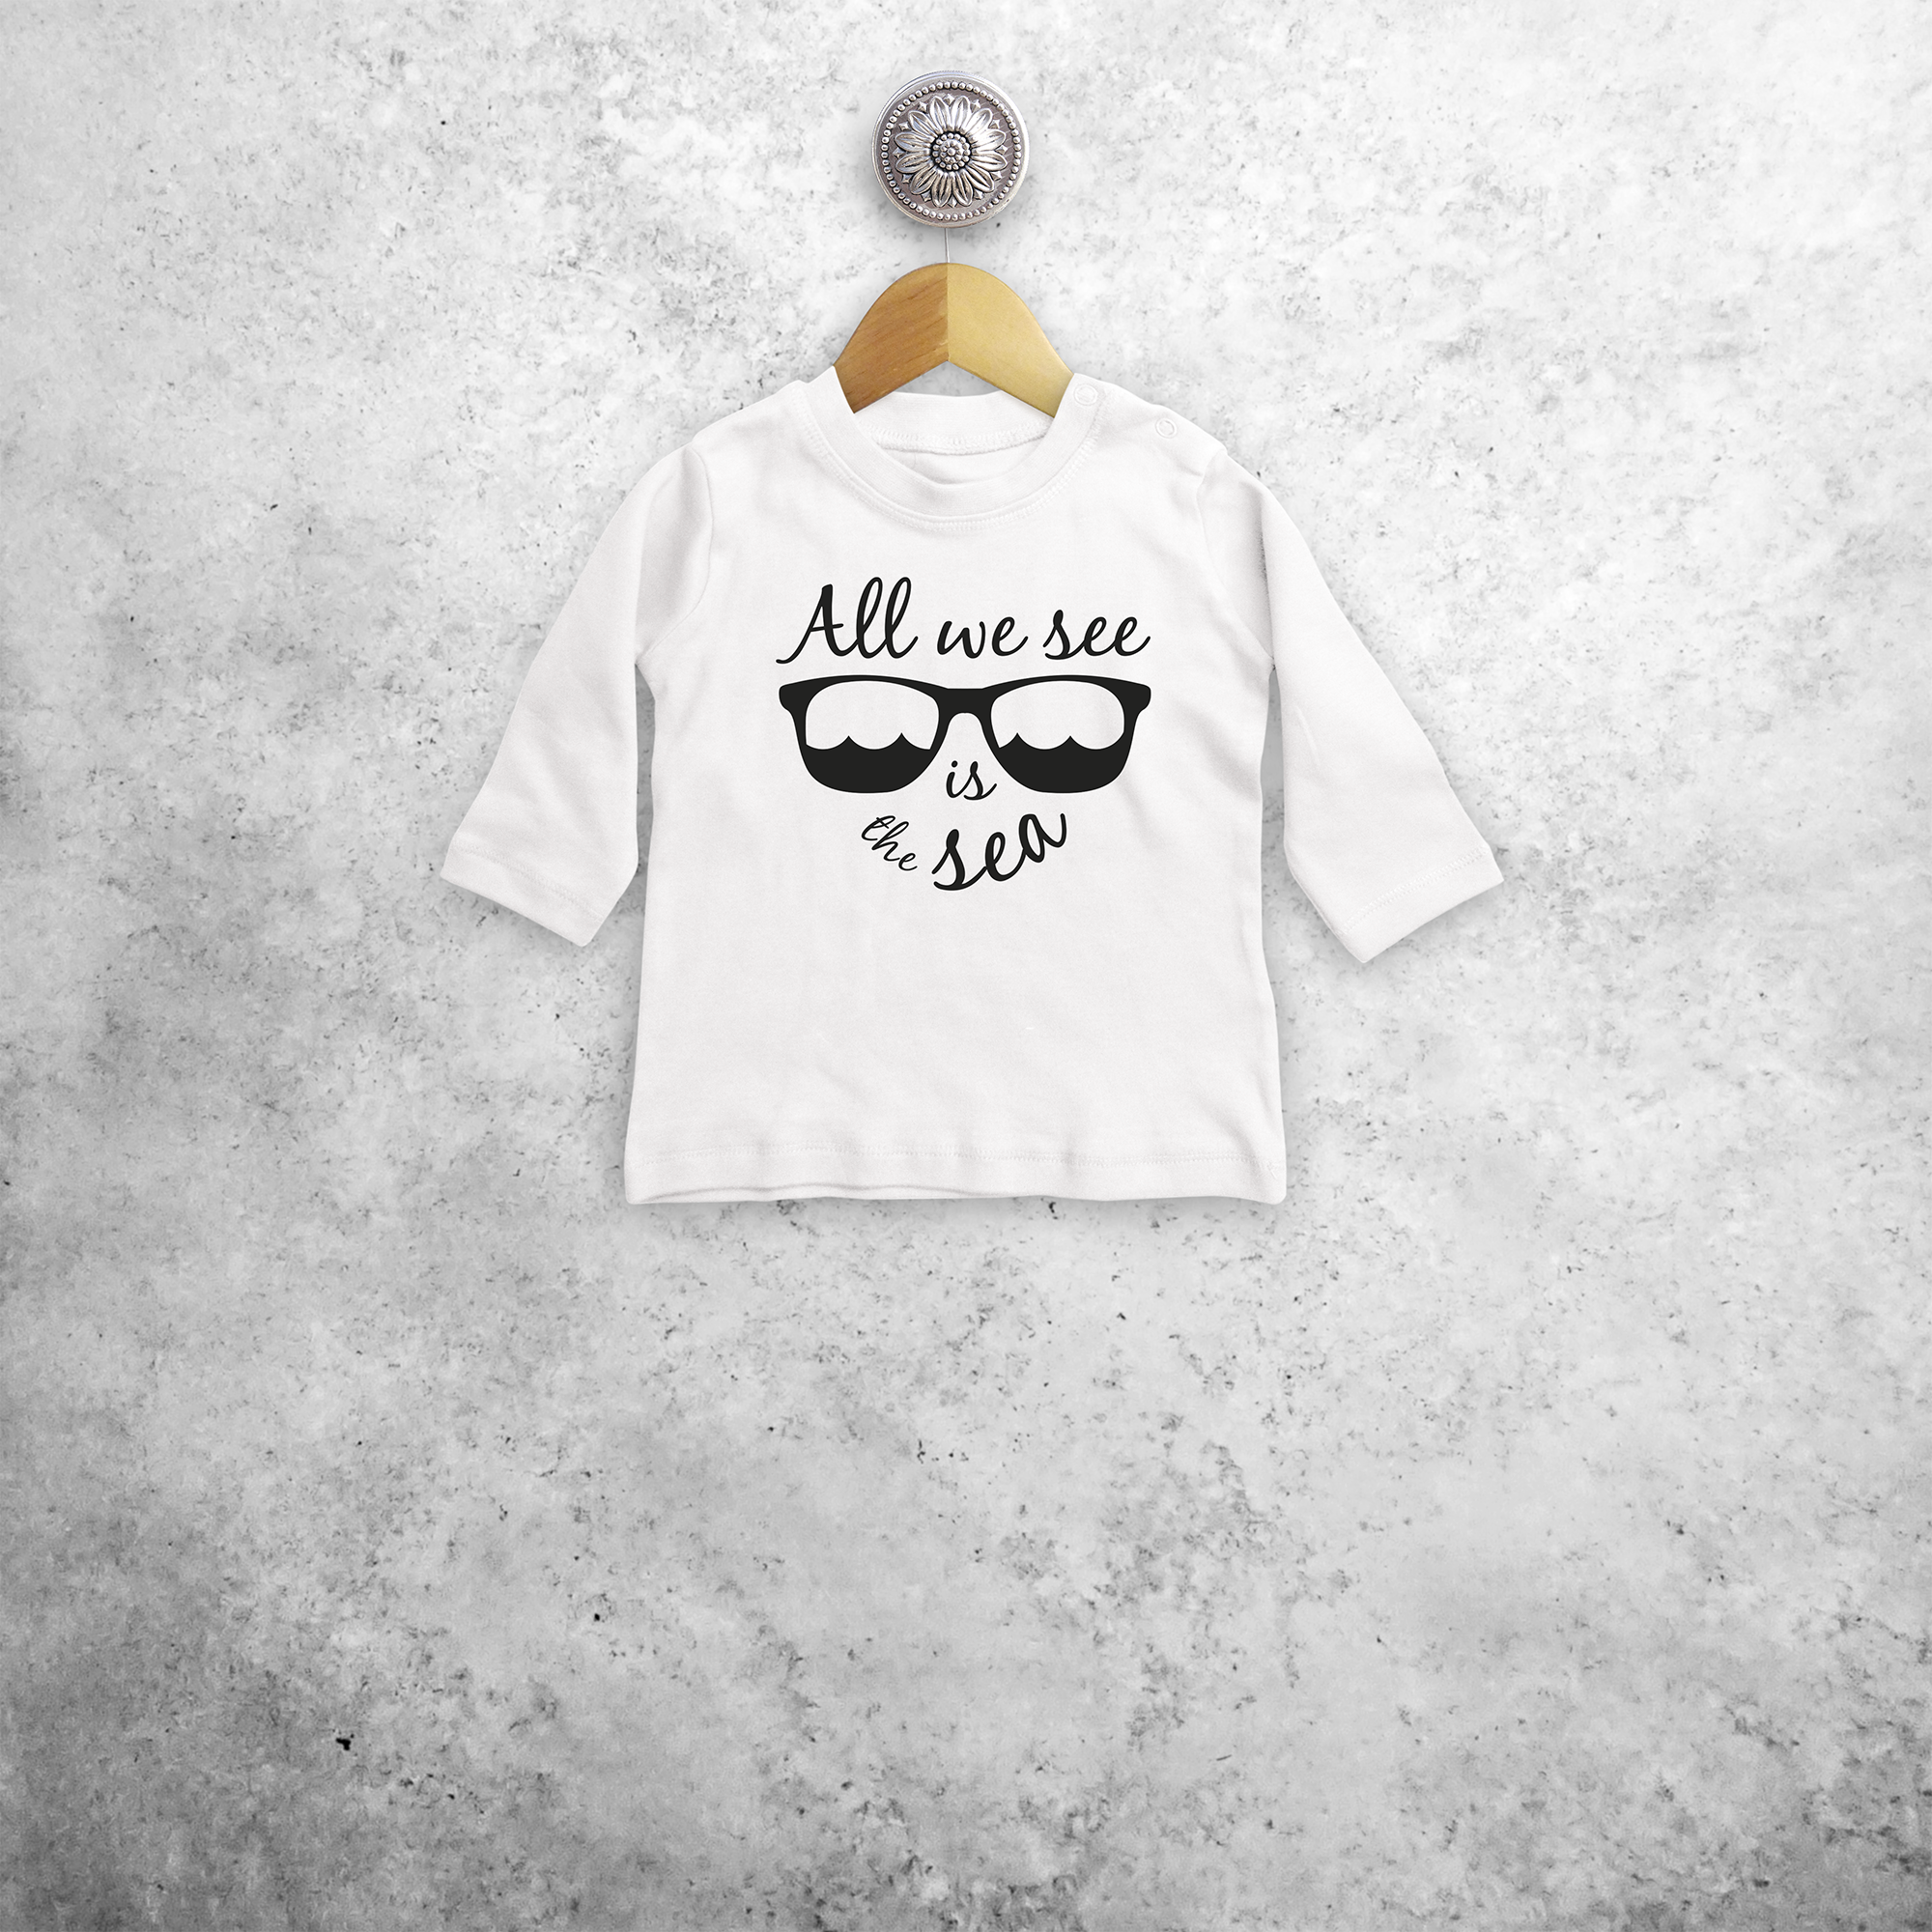 'All we see is the sea' baby longsleeve shirt